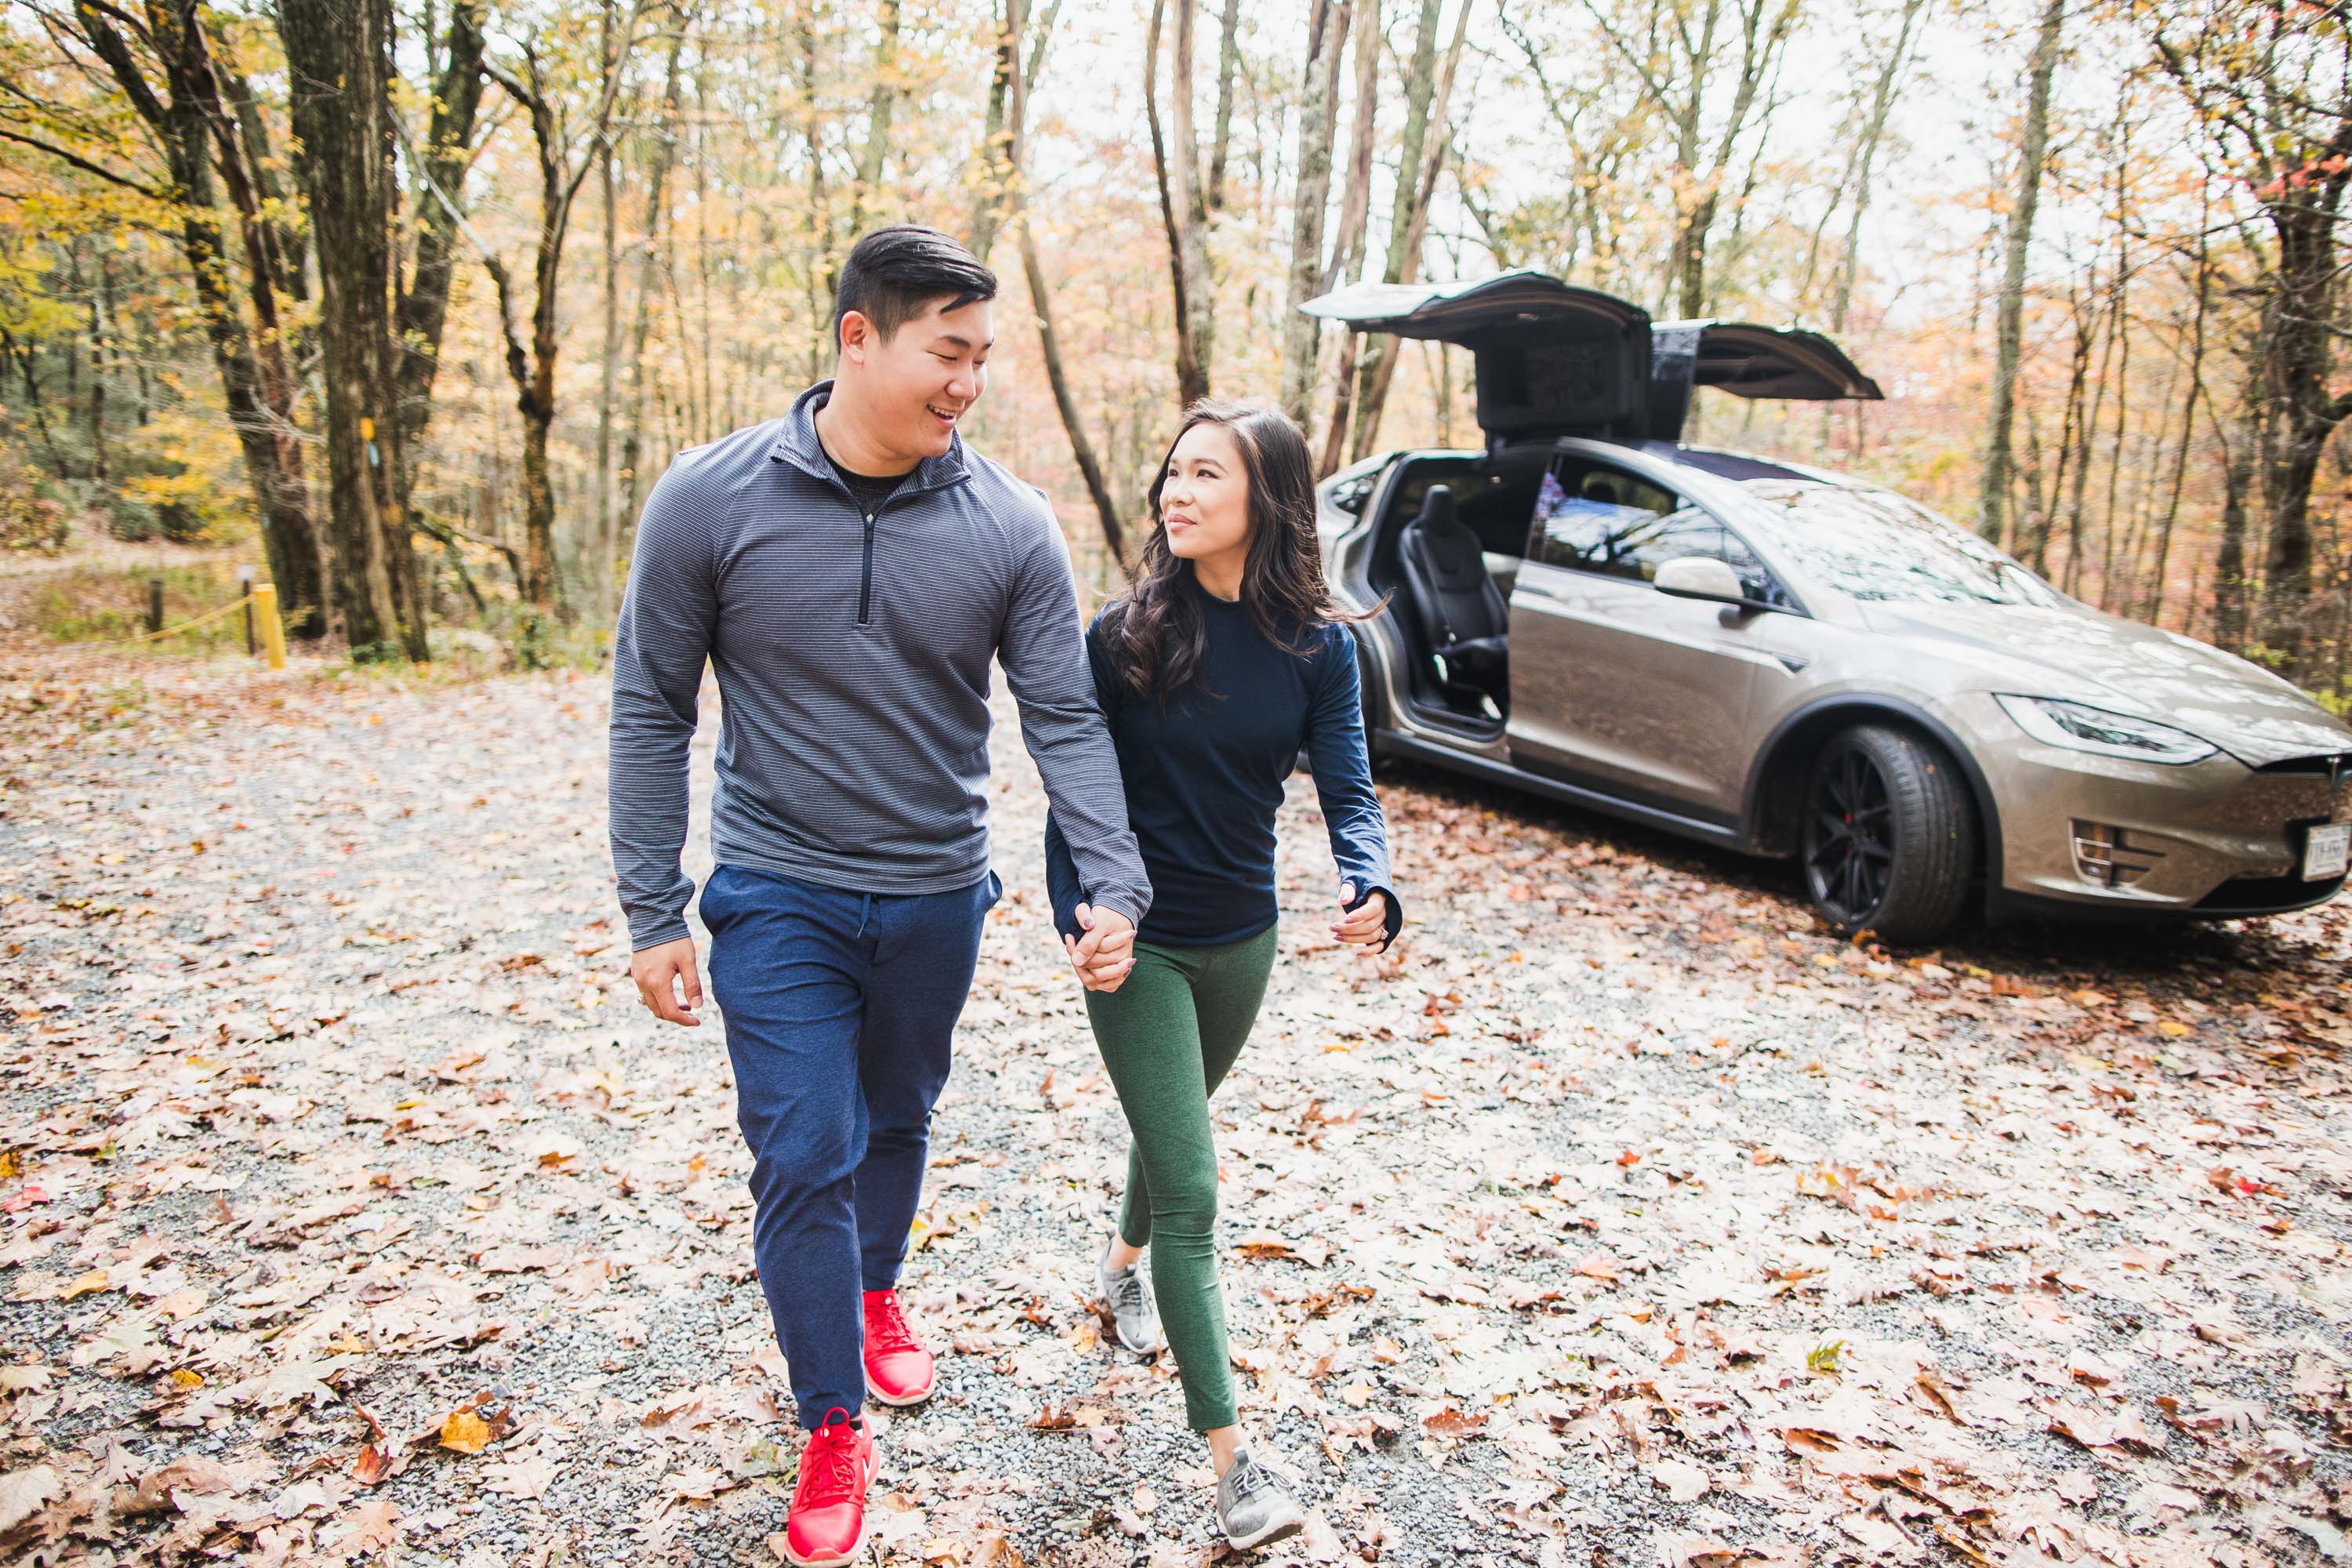 Driving a Tesla Model X into the Virginia Mountains for fall foliage wearing athleisure by Outdoor Voices